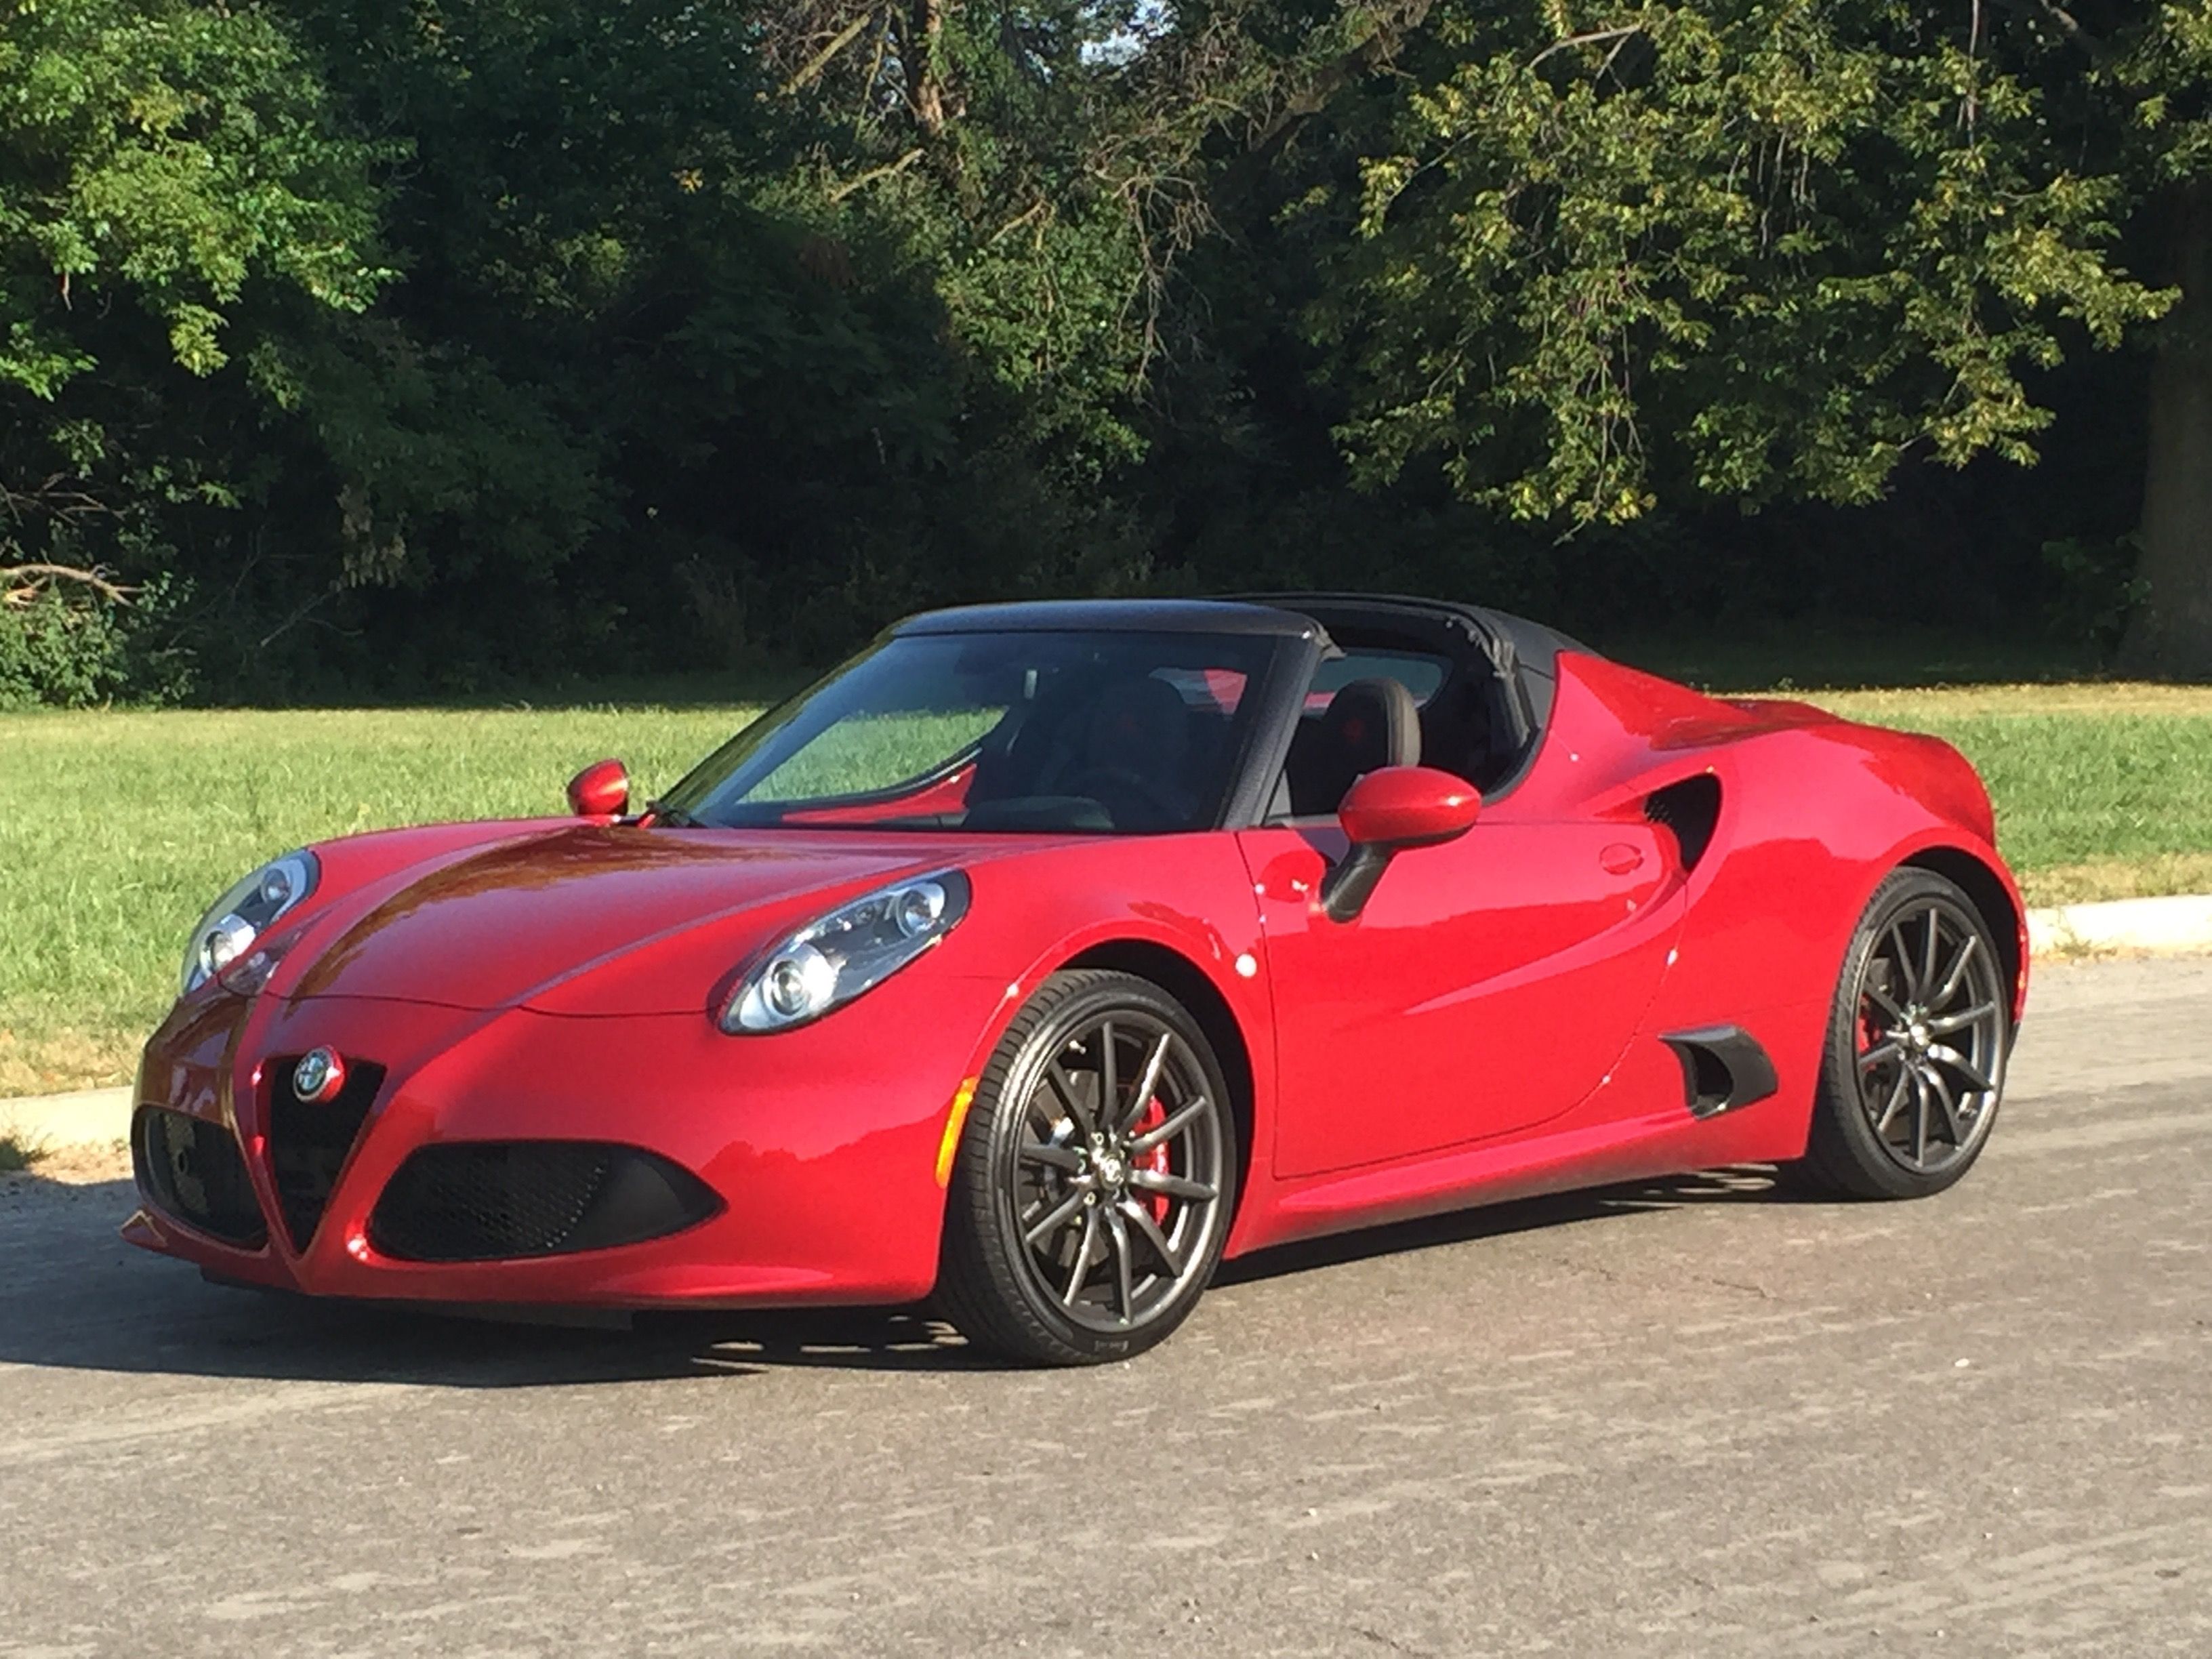 Alfa 4c was loved but nobody bought it